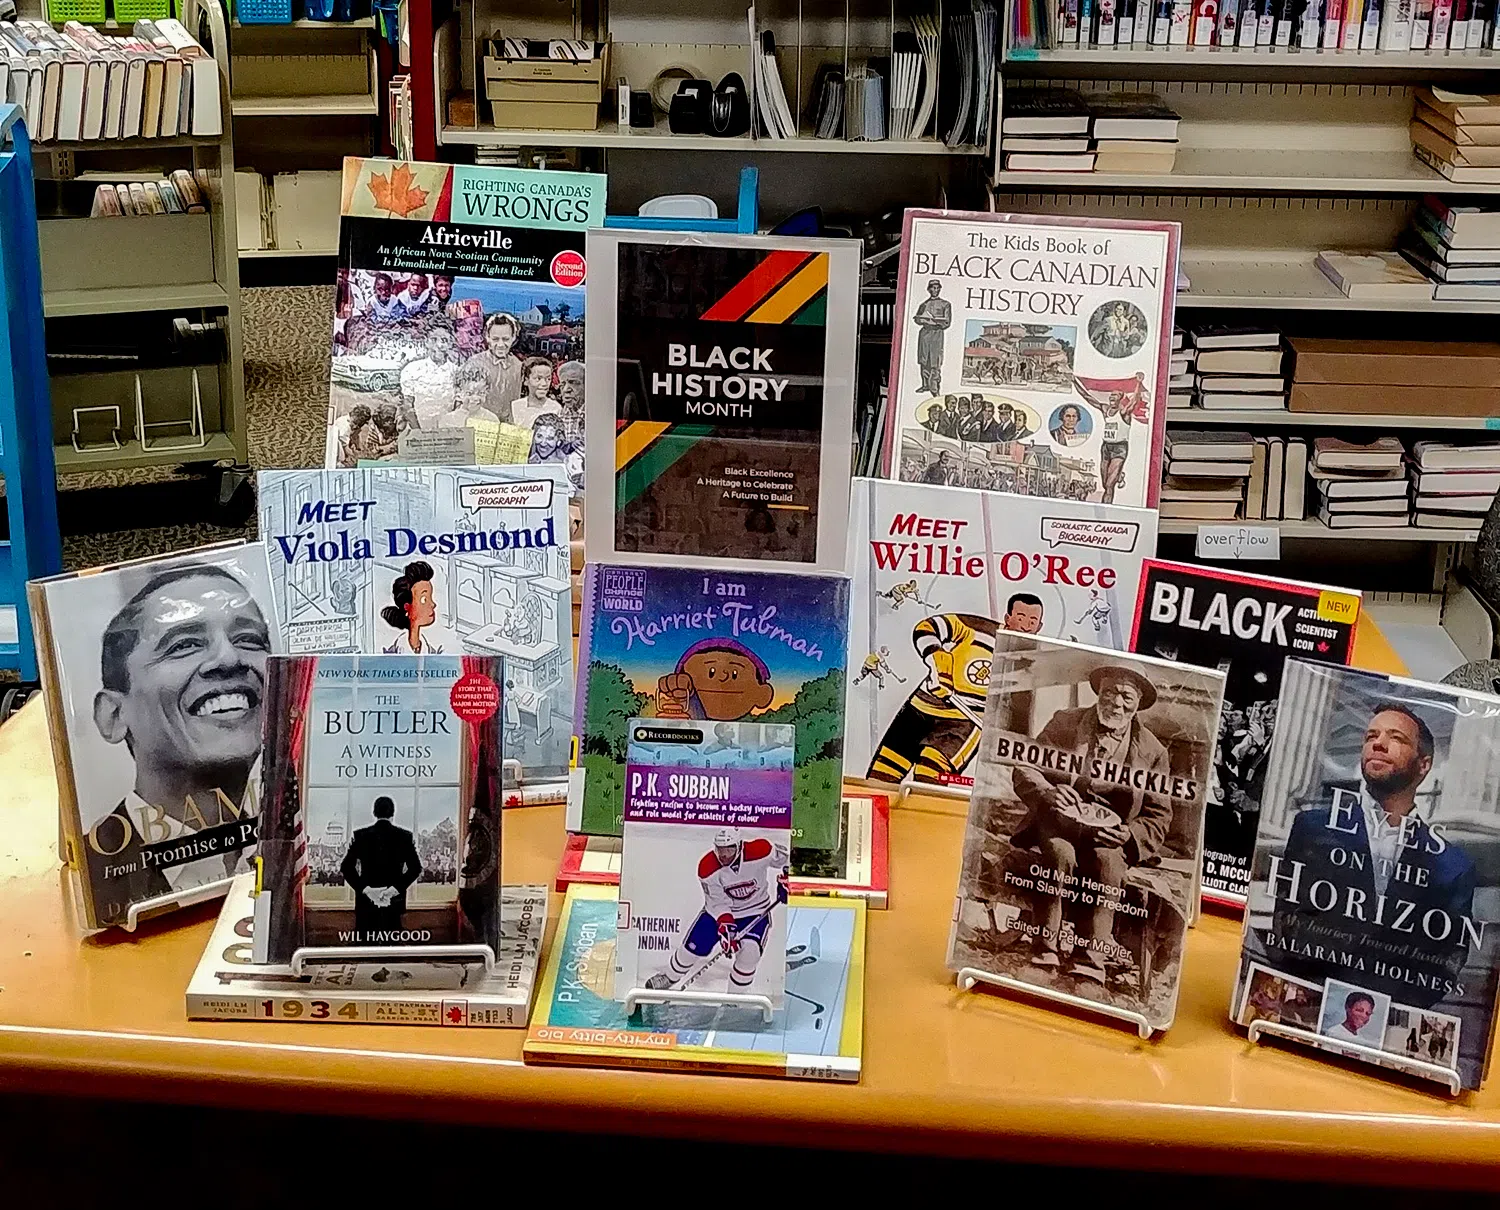 Learn More About Black History Locally